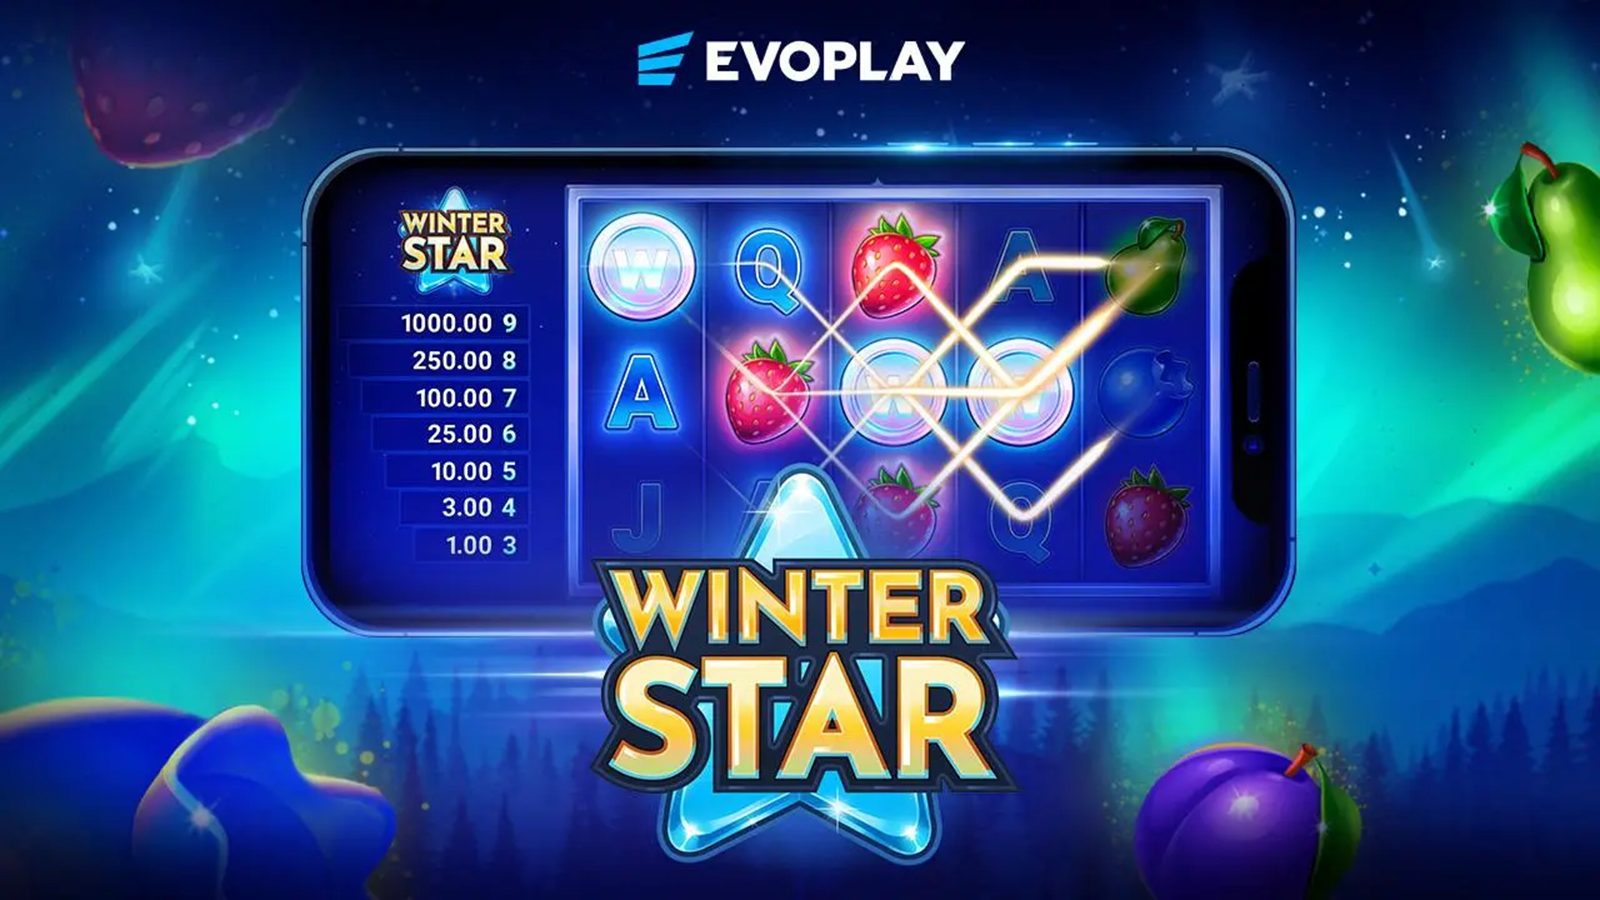 Winter Star Slot by Evoplay